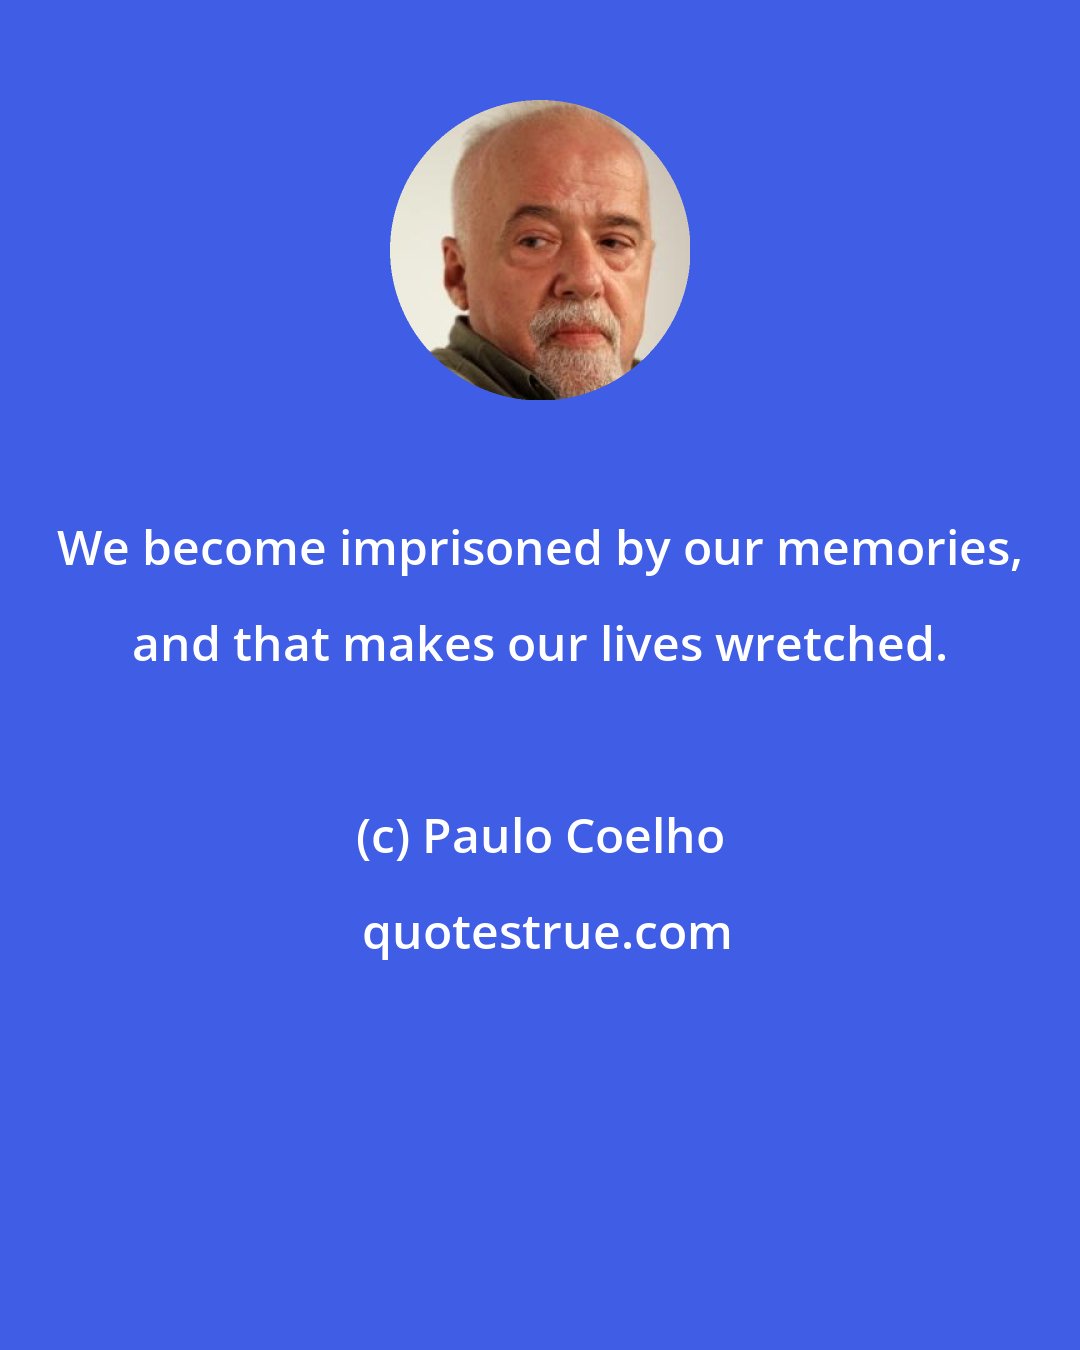 Paulo Coelho: We become imprisoned by our memories, and that makes our lives wretched.